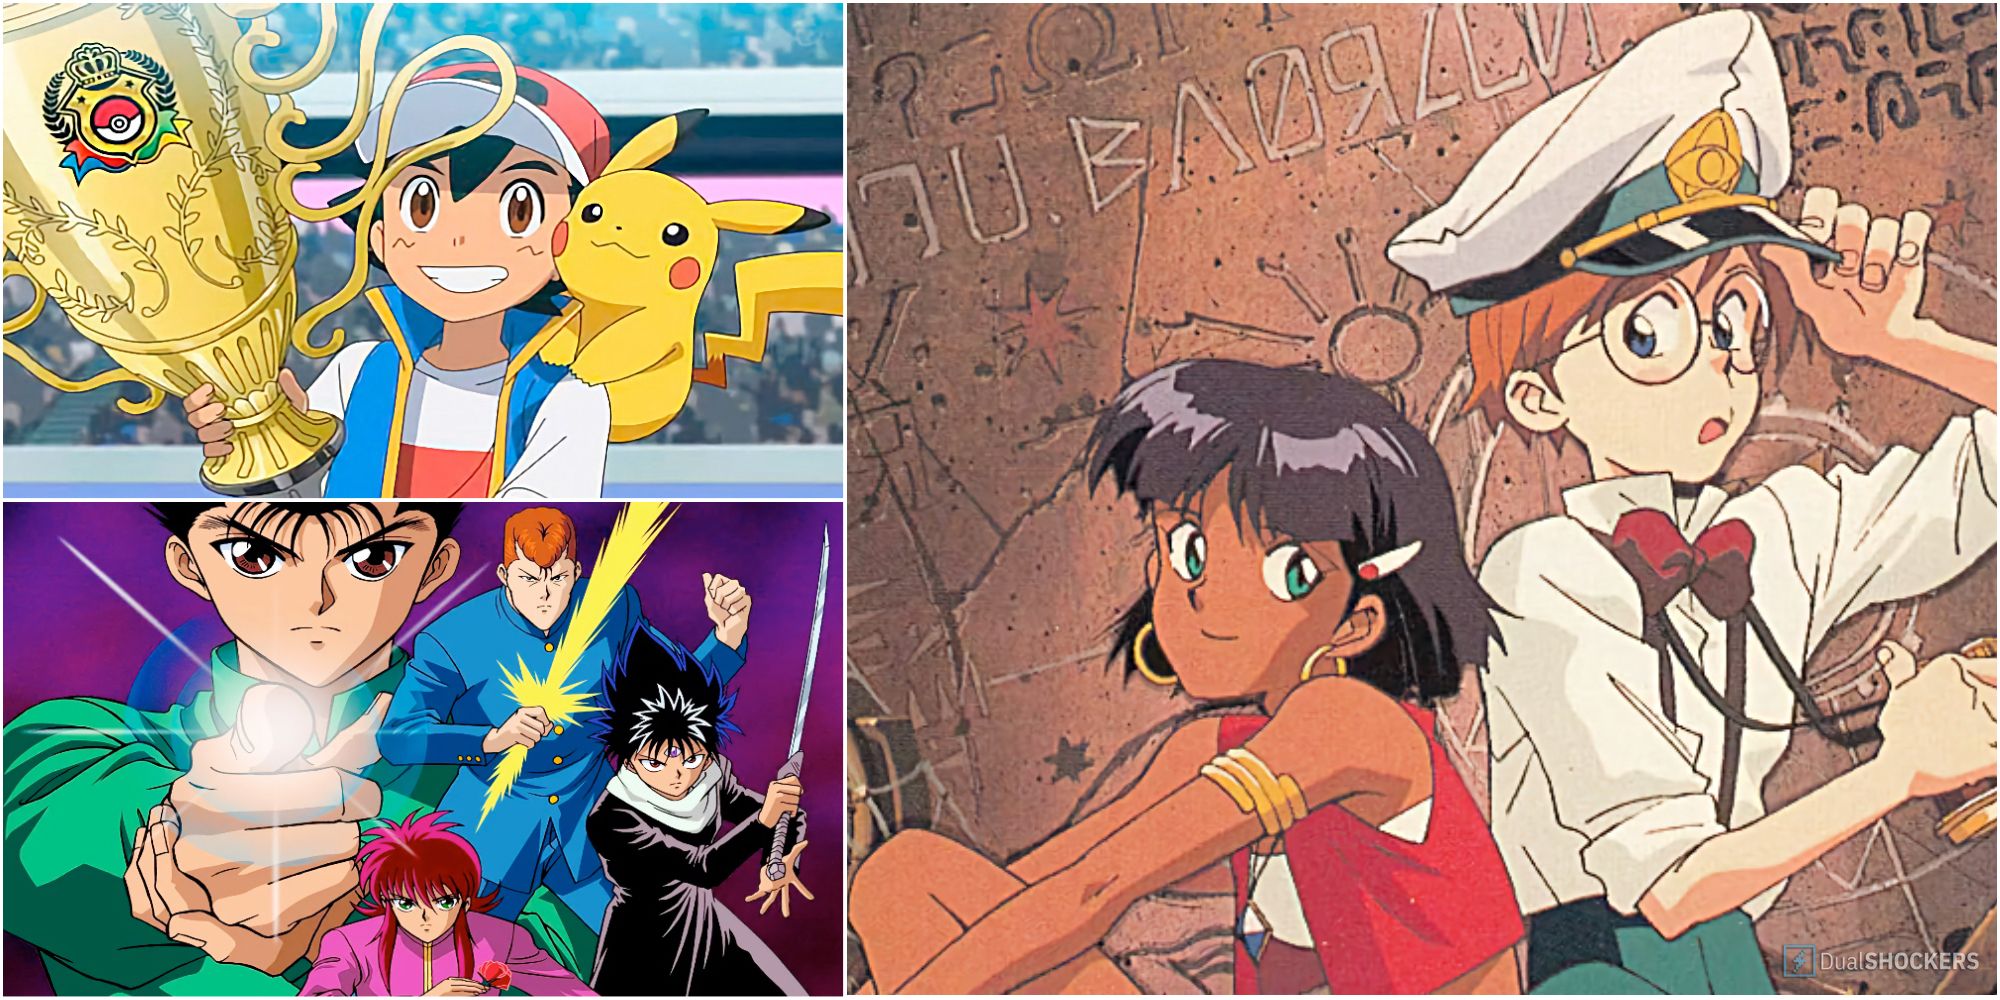 Best Anime From The 1990s: Our Top 30 Picks (Series & Movies) – FandomSpot